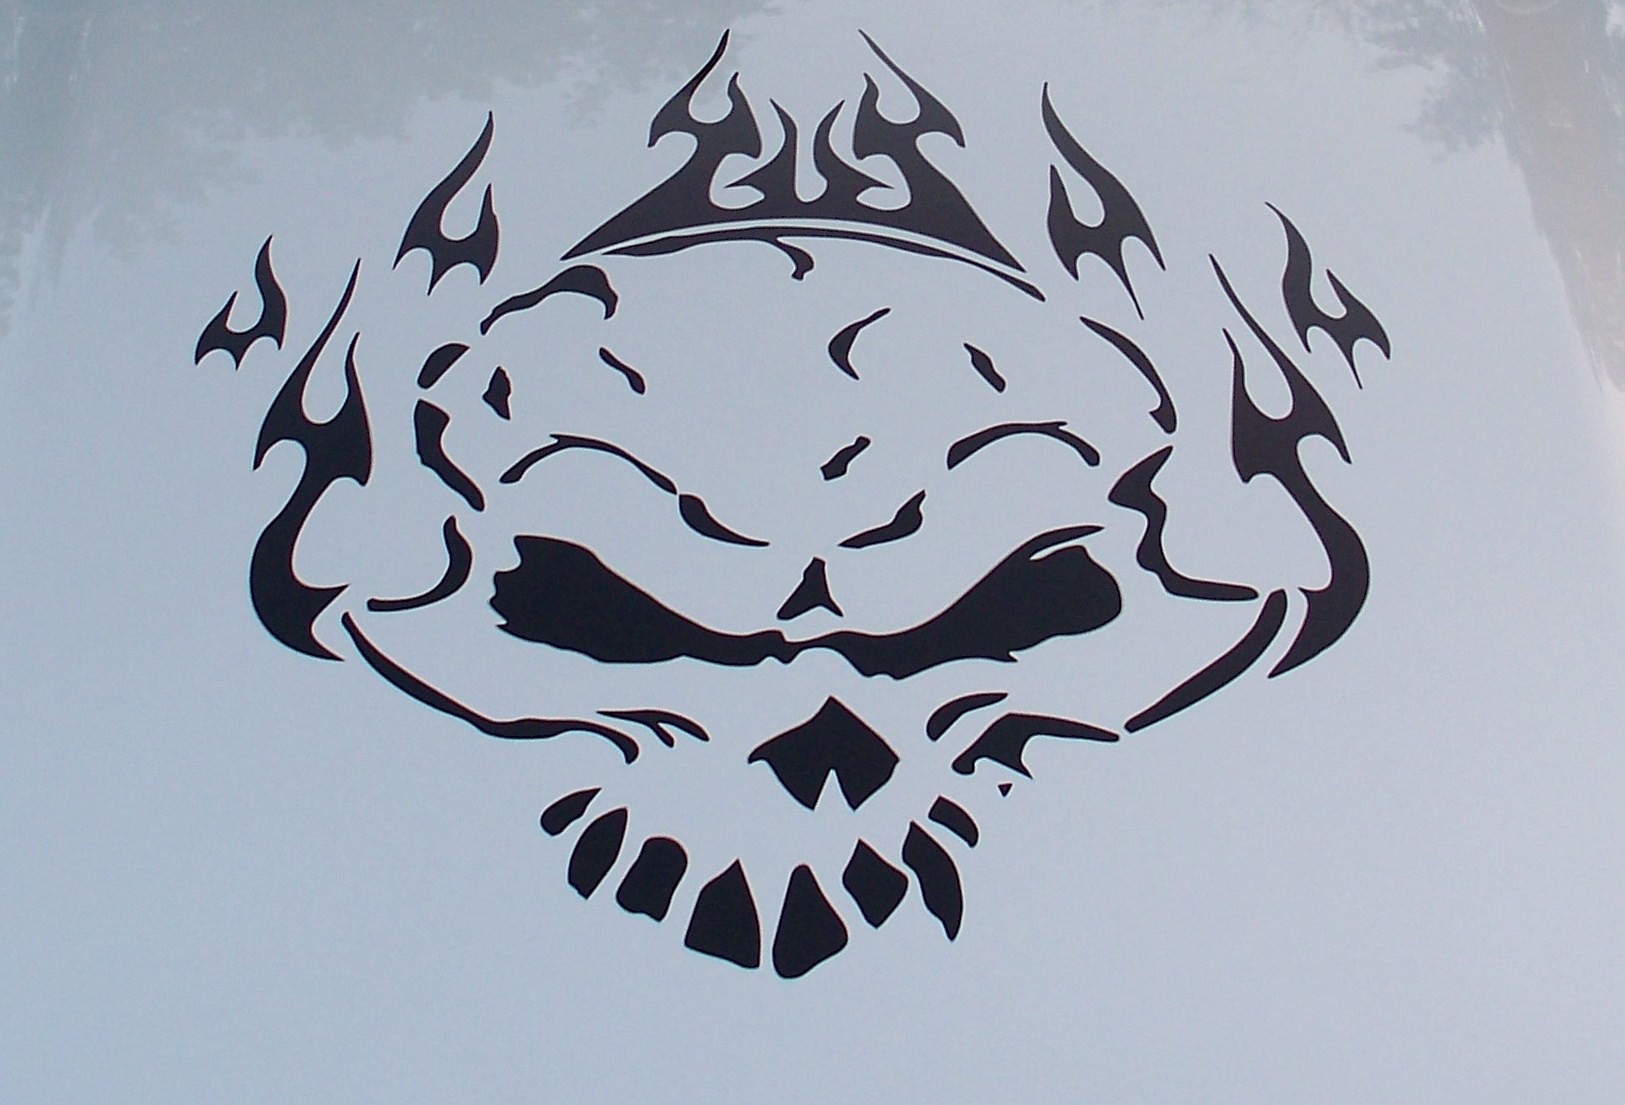 LARGE Skull Flames Hood / Window graphic Decal / Sticker